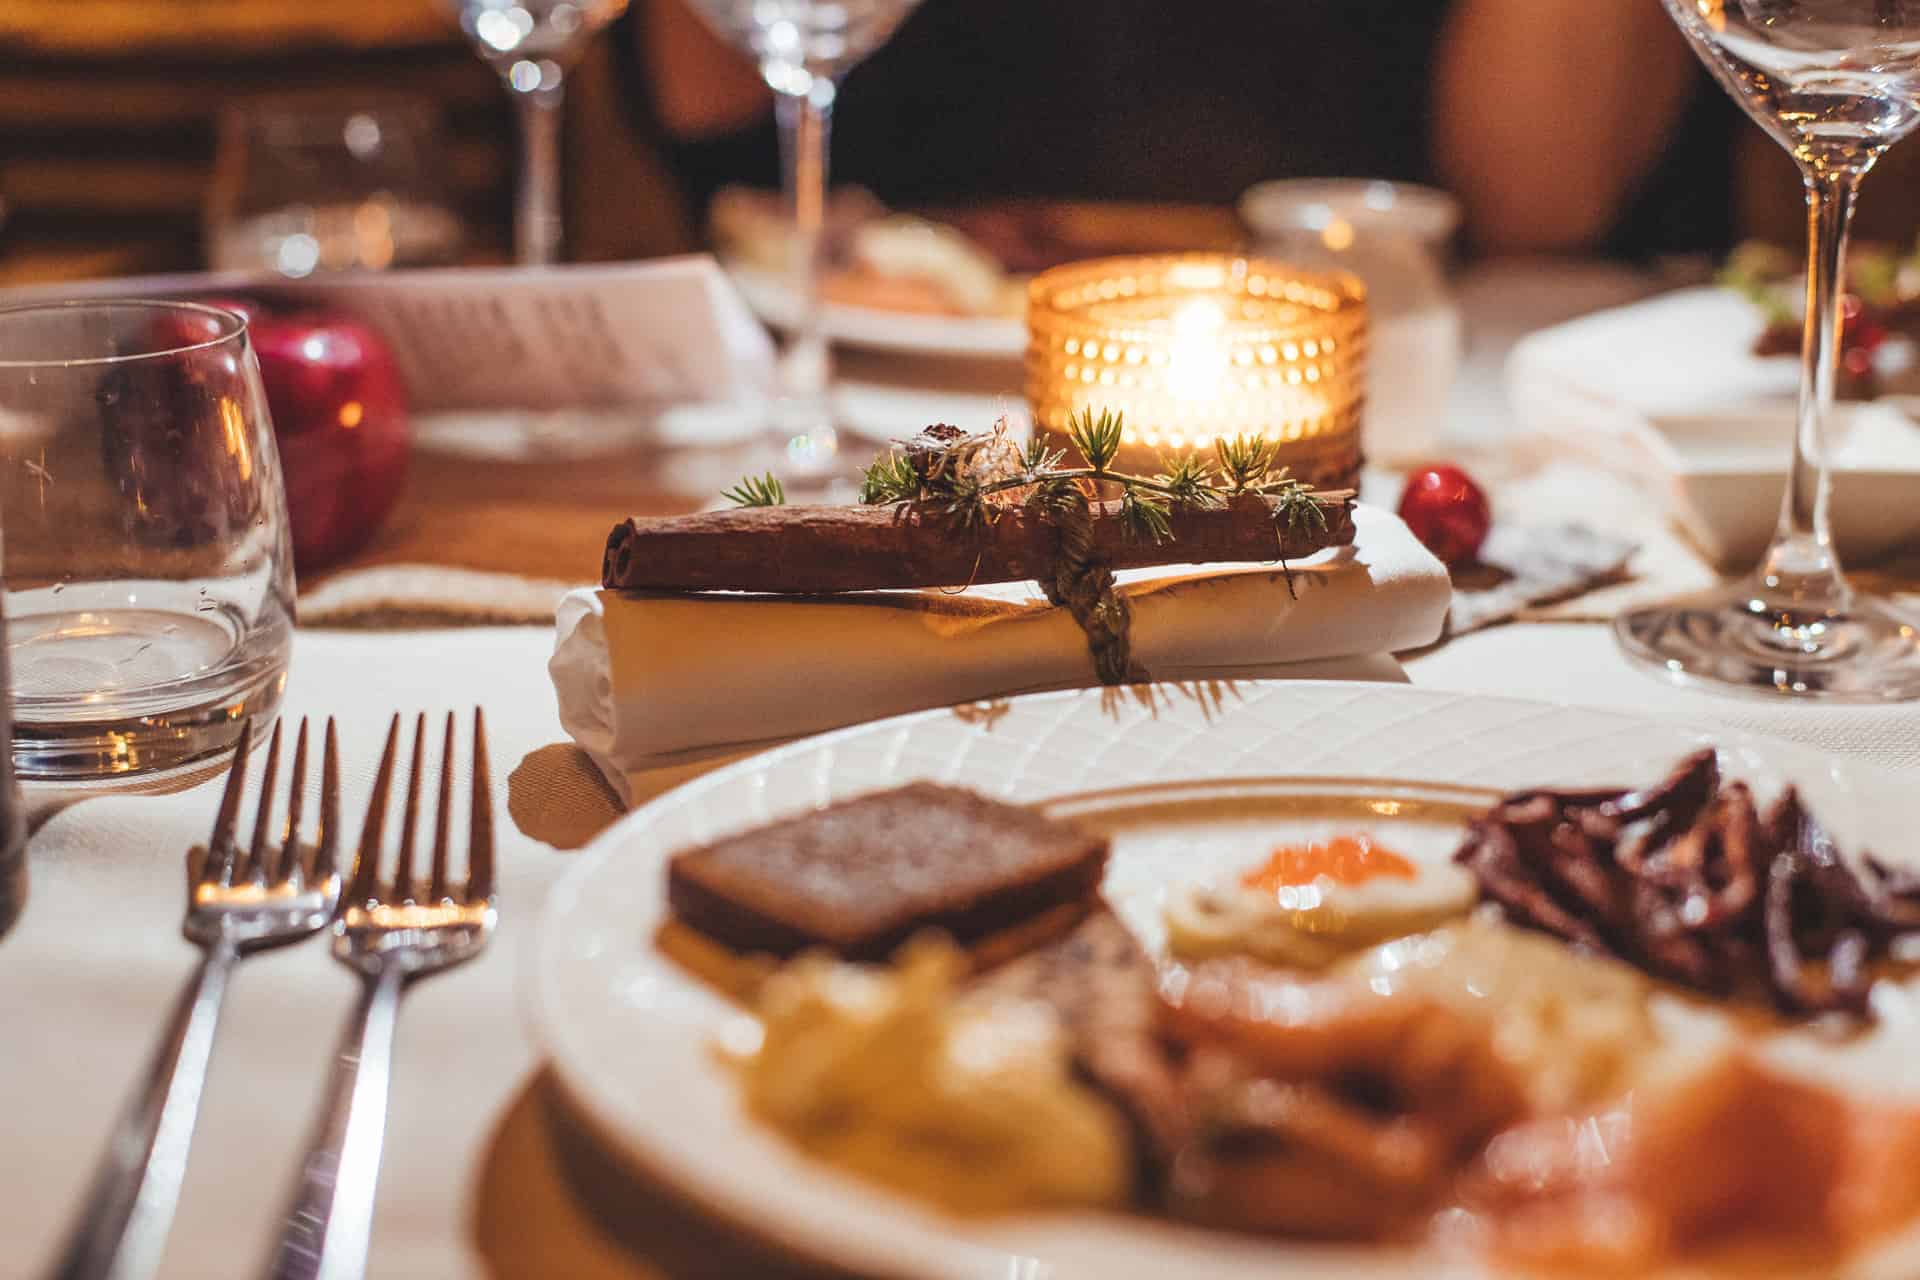 A plate filled with delicious dishes from Hotel Rangá's famous Icelandic Christmas Buffet.